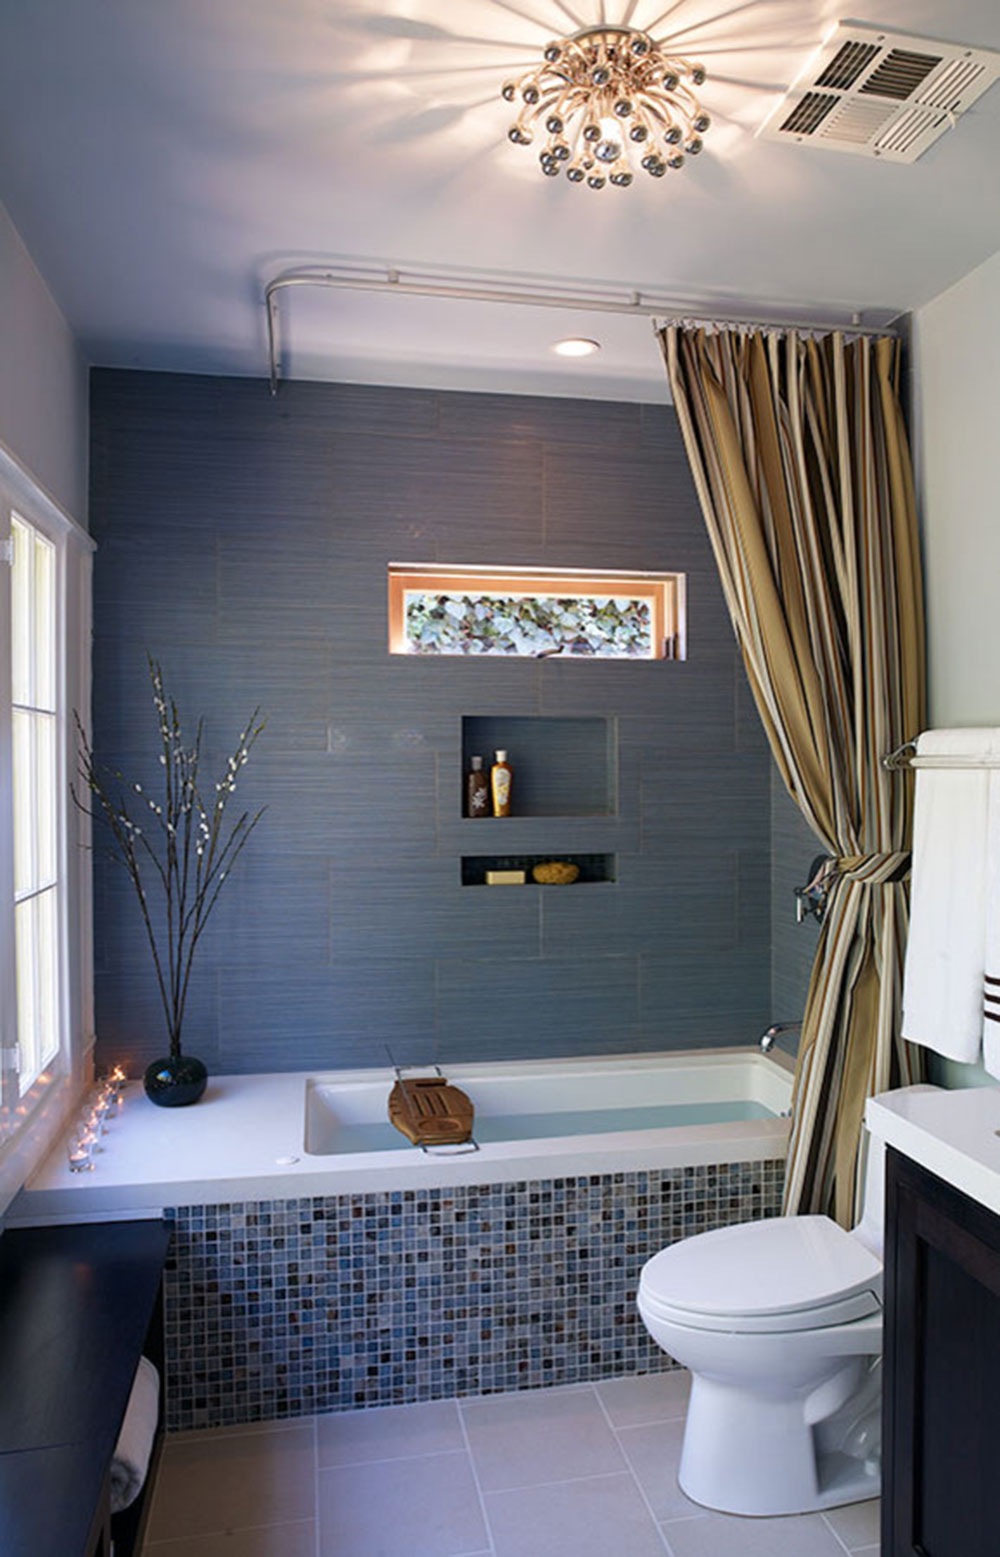 Trendy Shower Curtains For Your Bathrooms, Shower Curtain Ideas For Small Bathroom